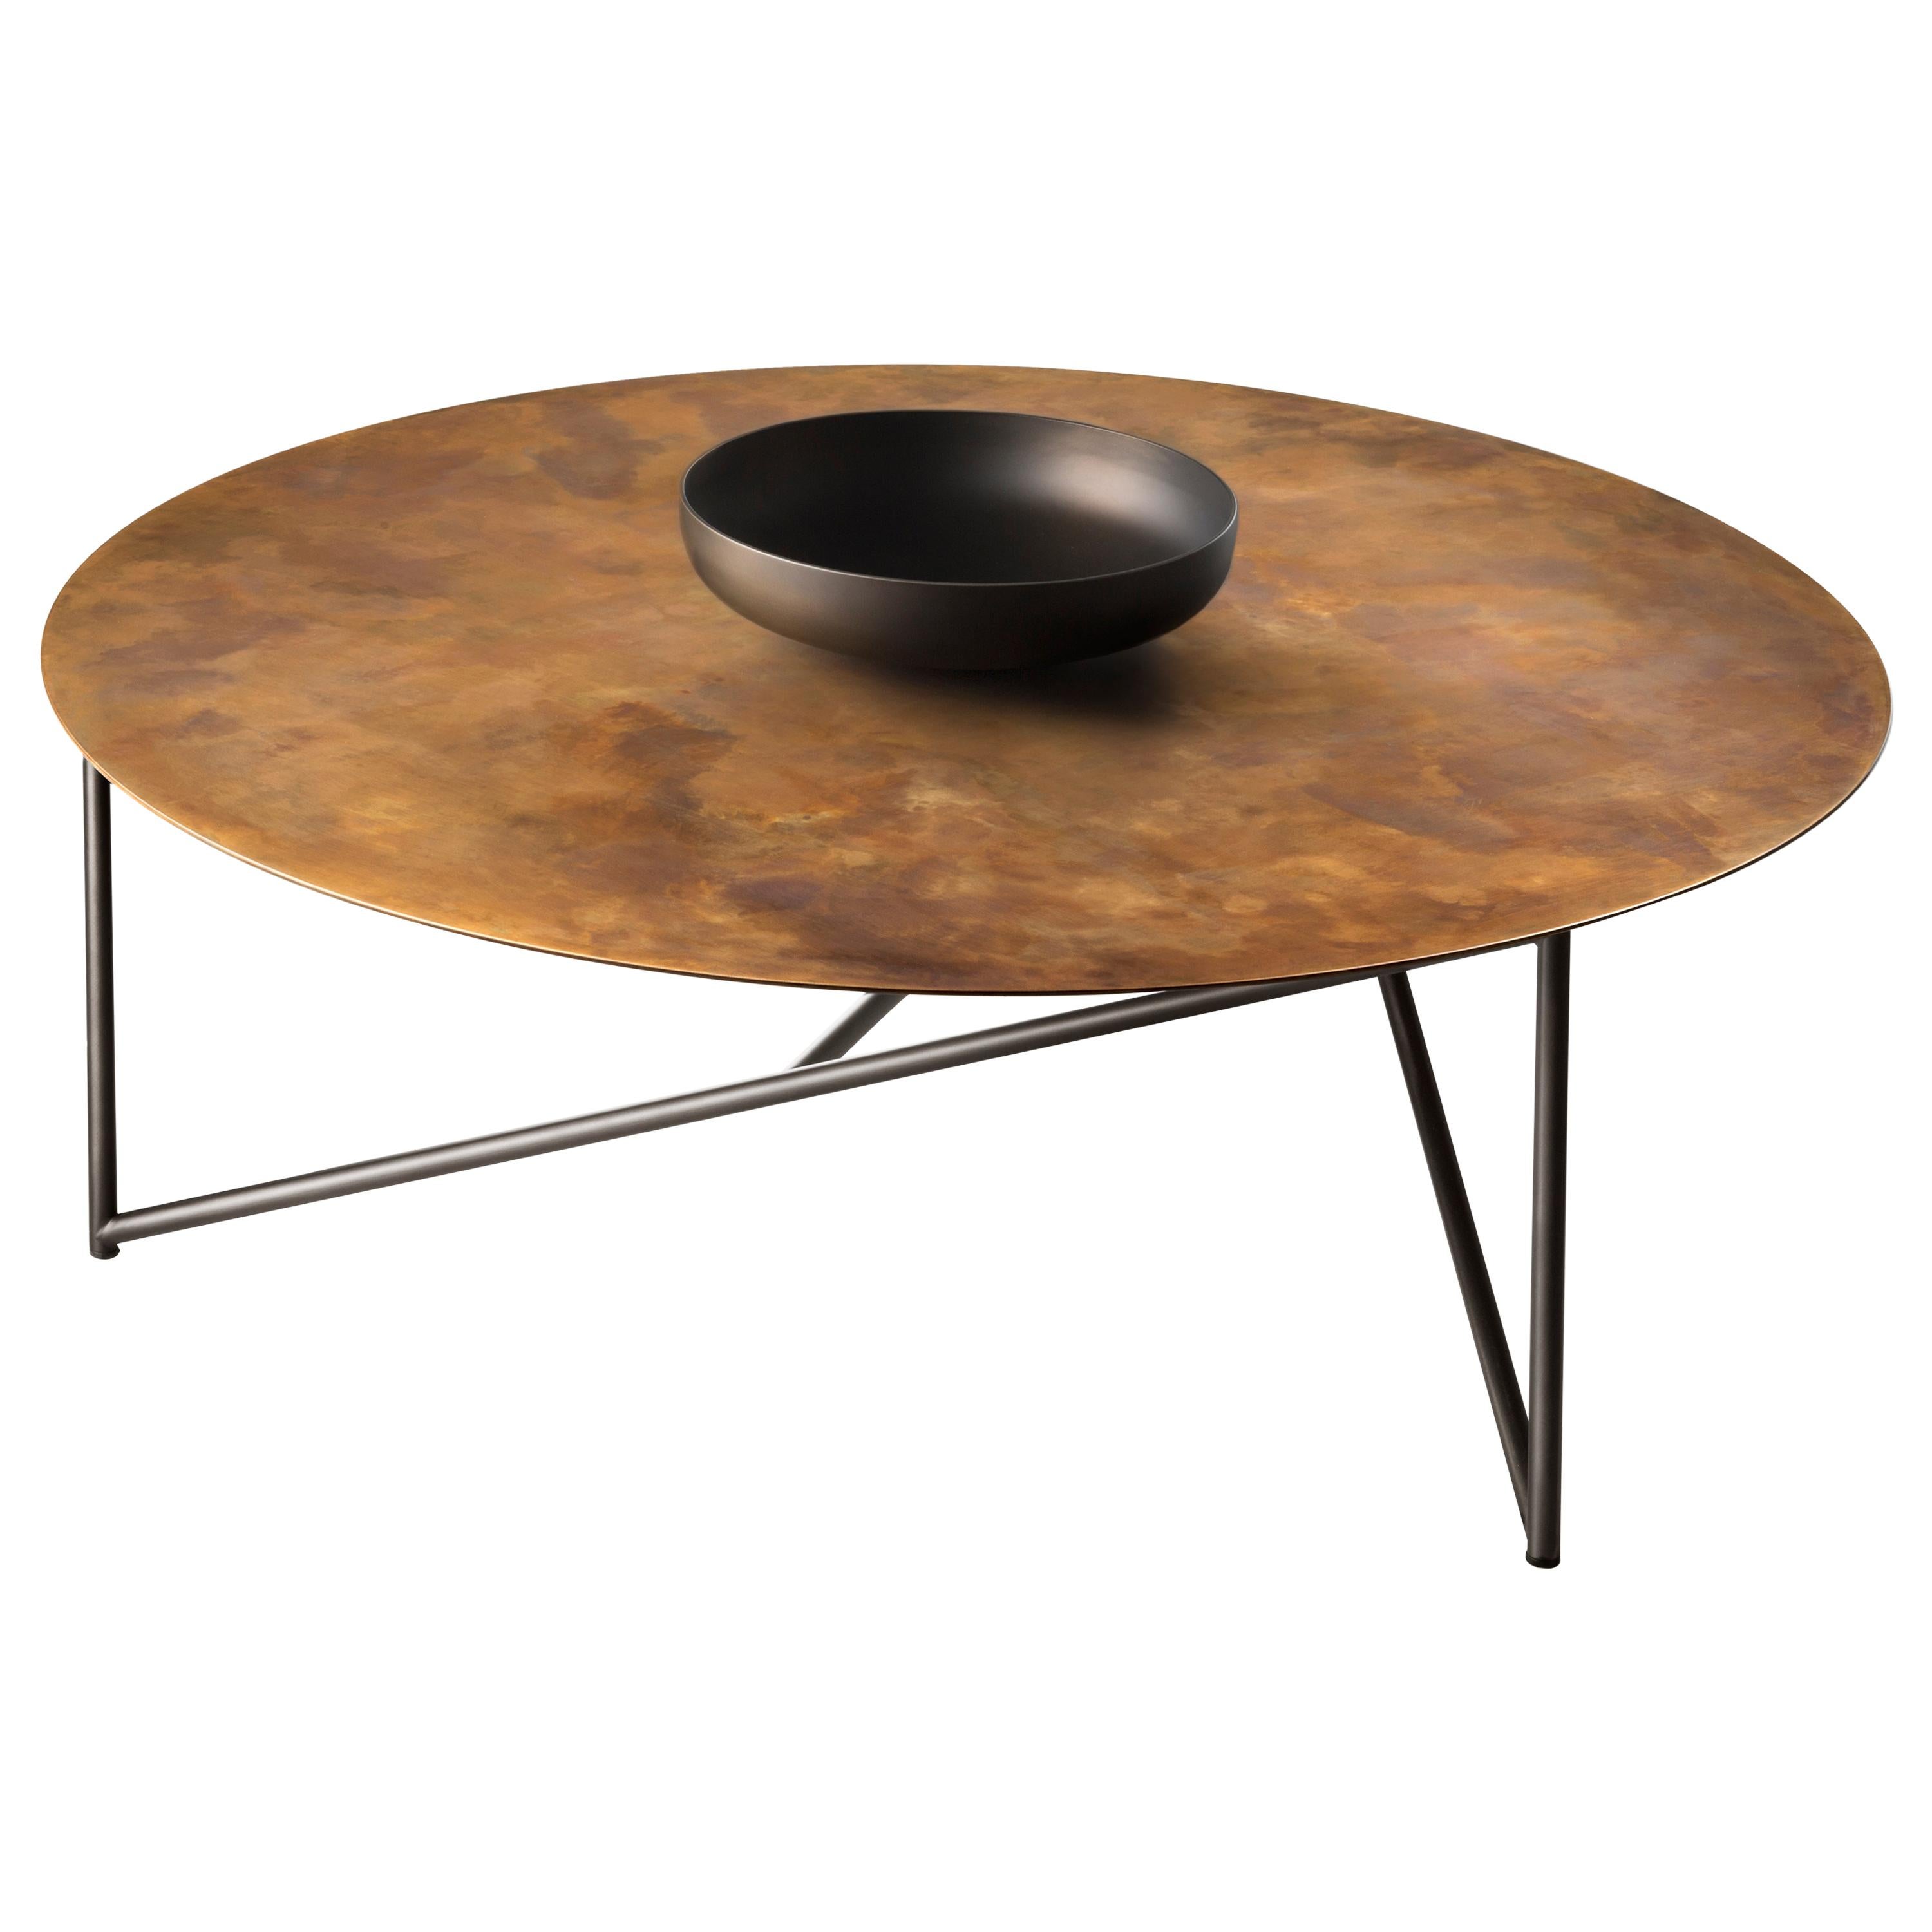 DeCastelli Parsec 98 Coffee Table in Brass with Central Metal Bowl